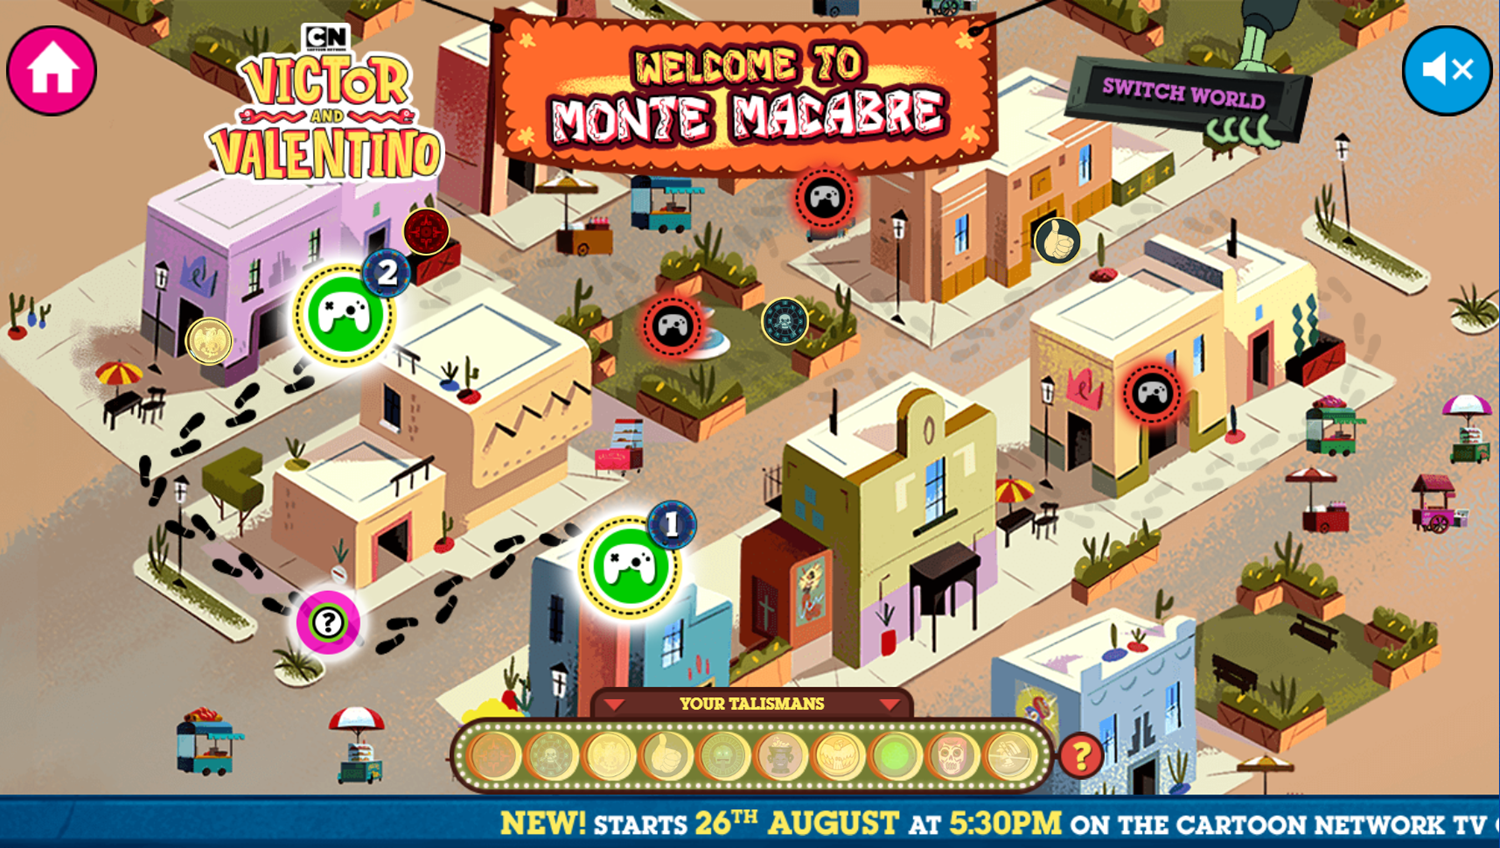 Victor and Valentino Mission to Monte Macabre Case Game Map Screenshot.